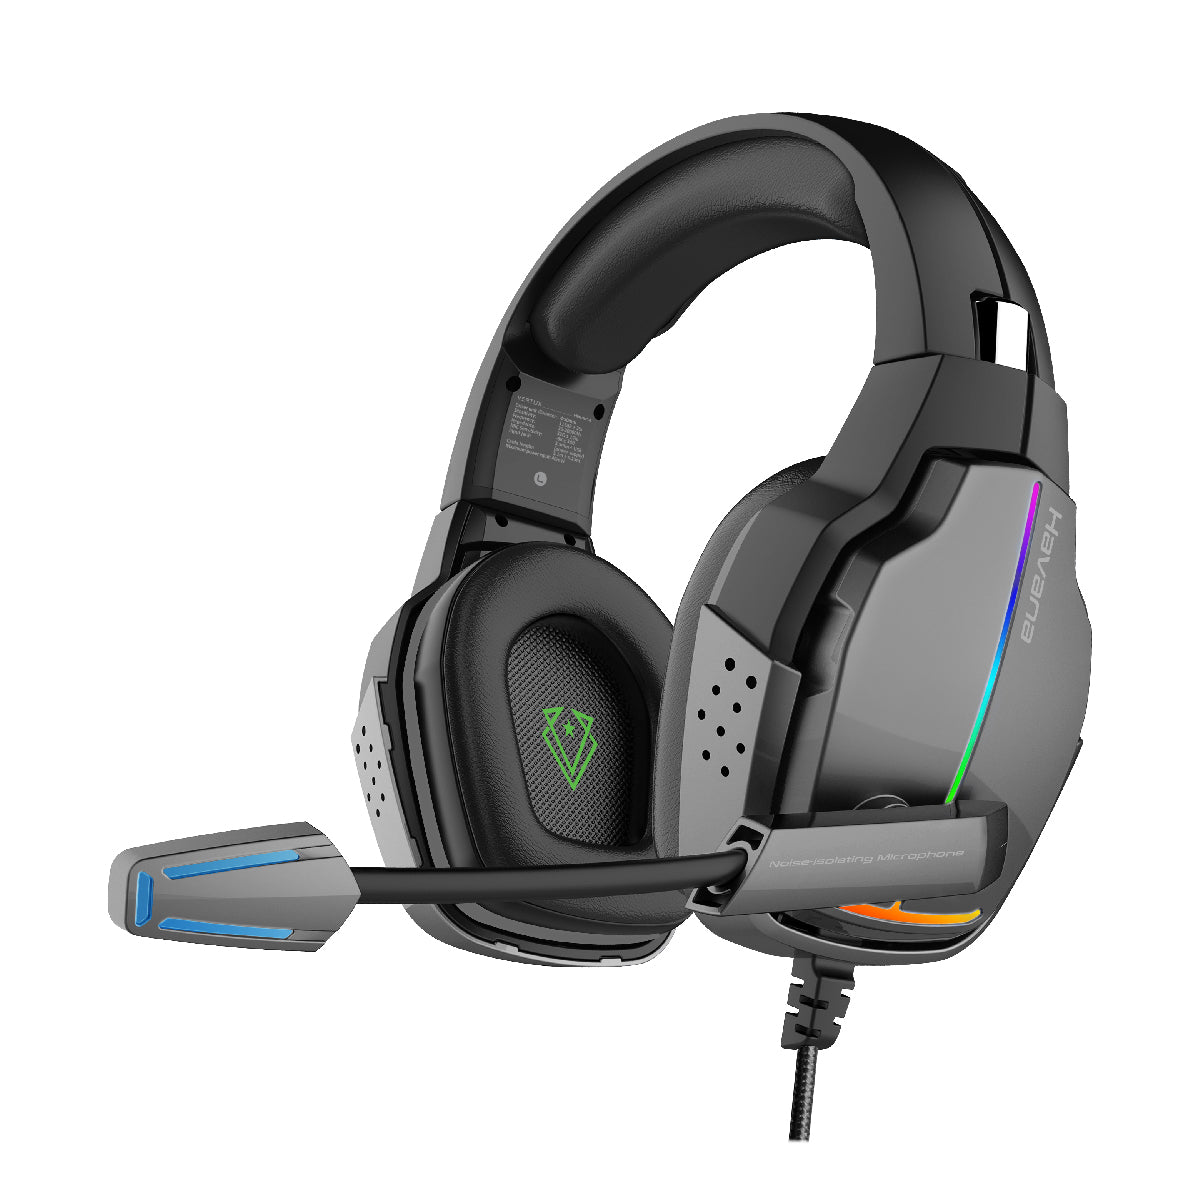 High Definition Audio Immersive Gaming Headset